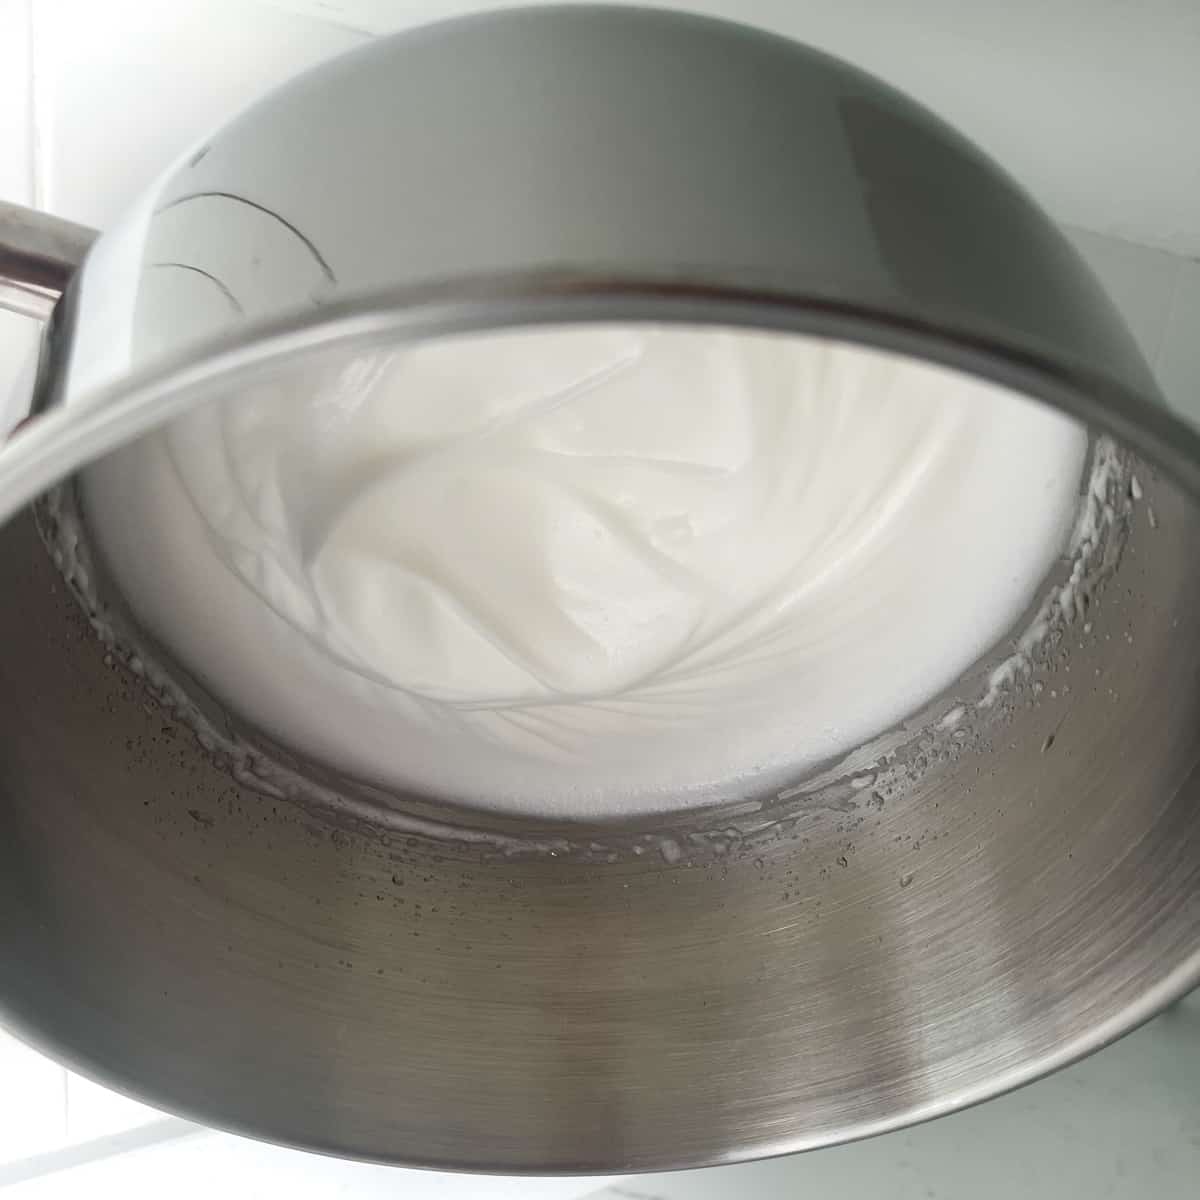 Egg whites for the mini meringues in an upside down bowl to demonstrate the stiffness.